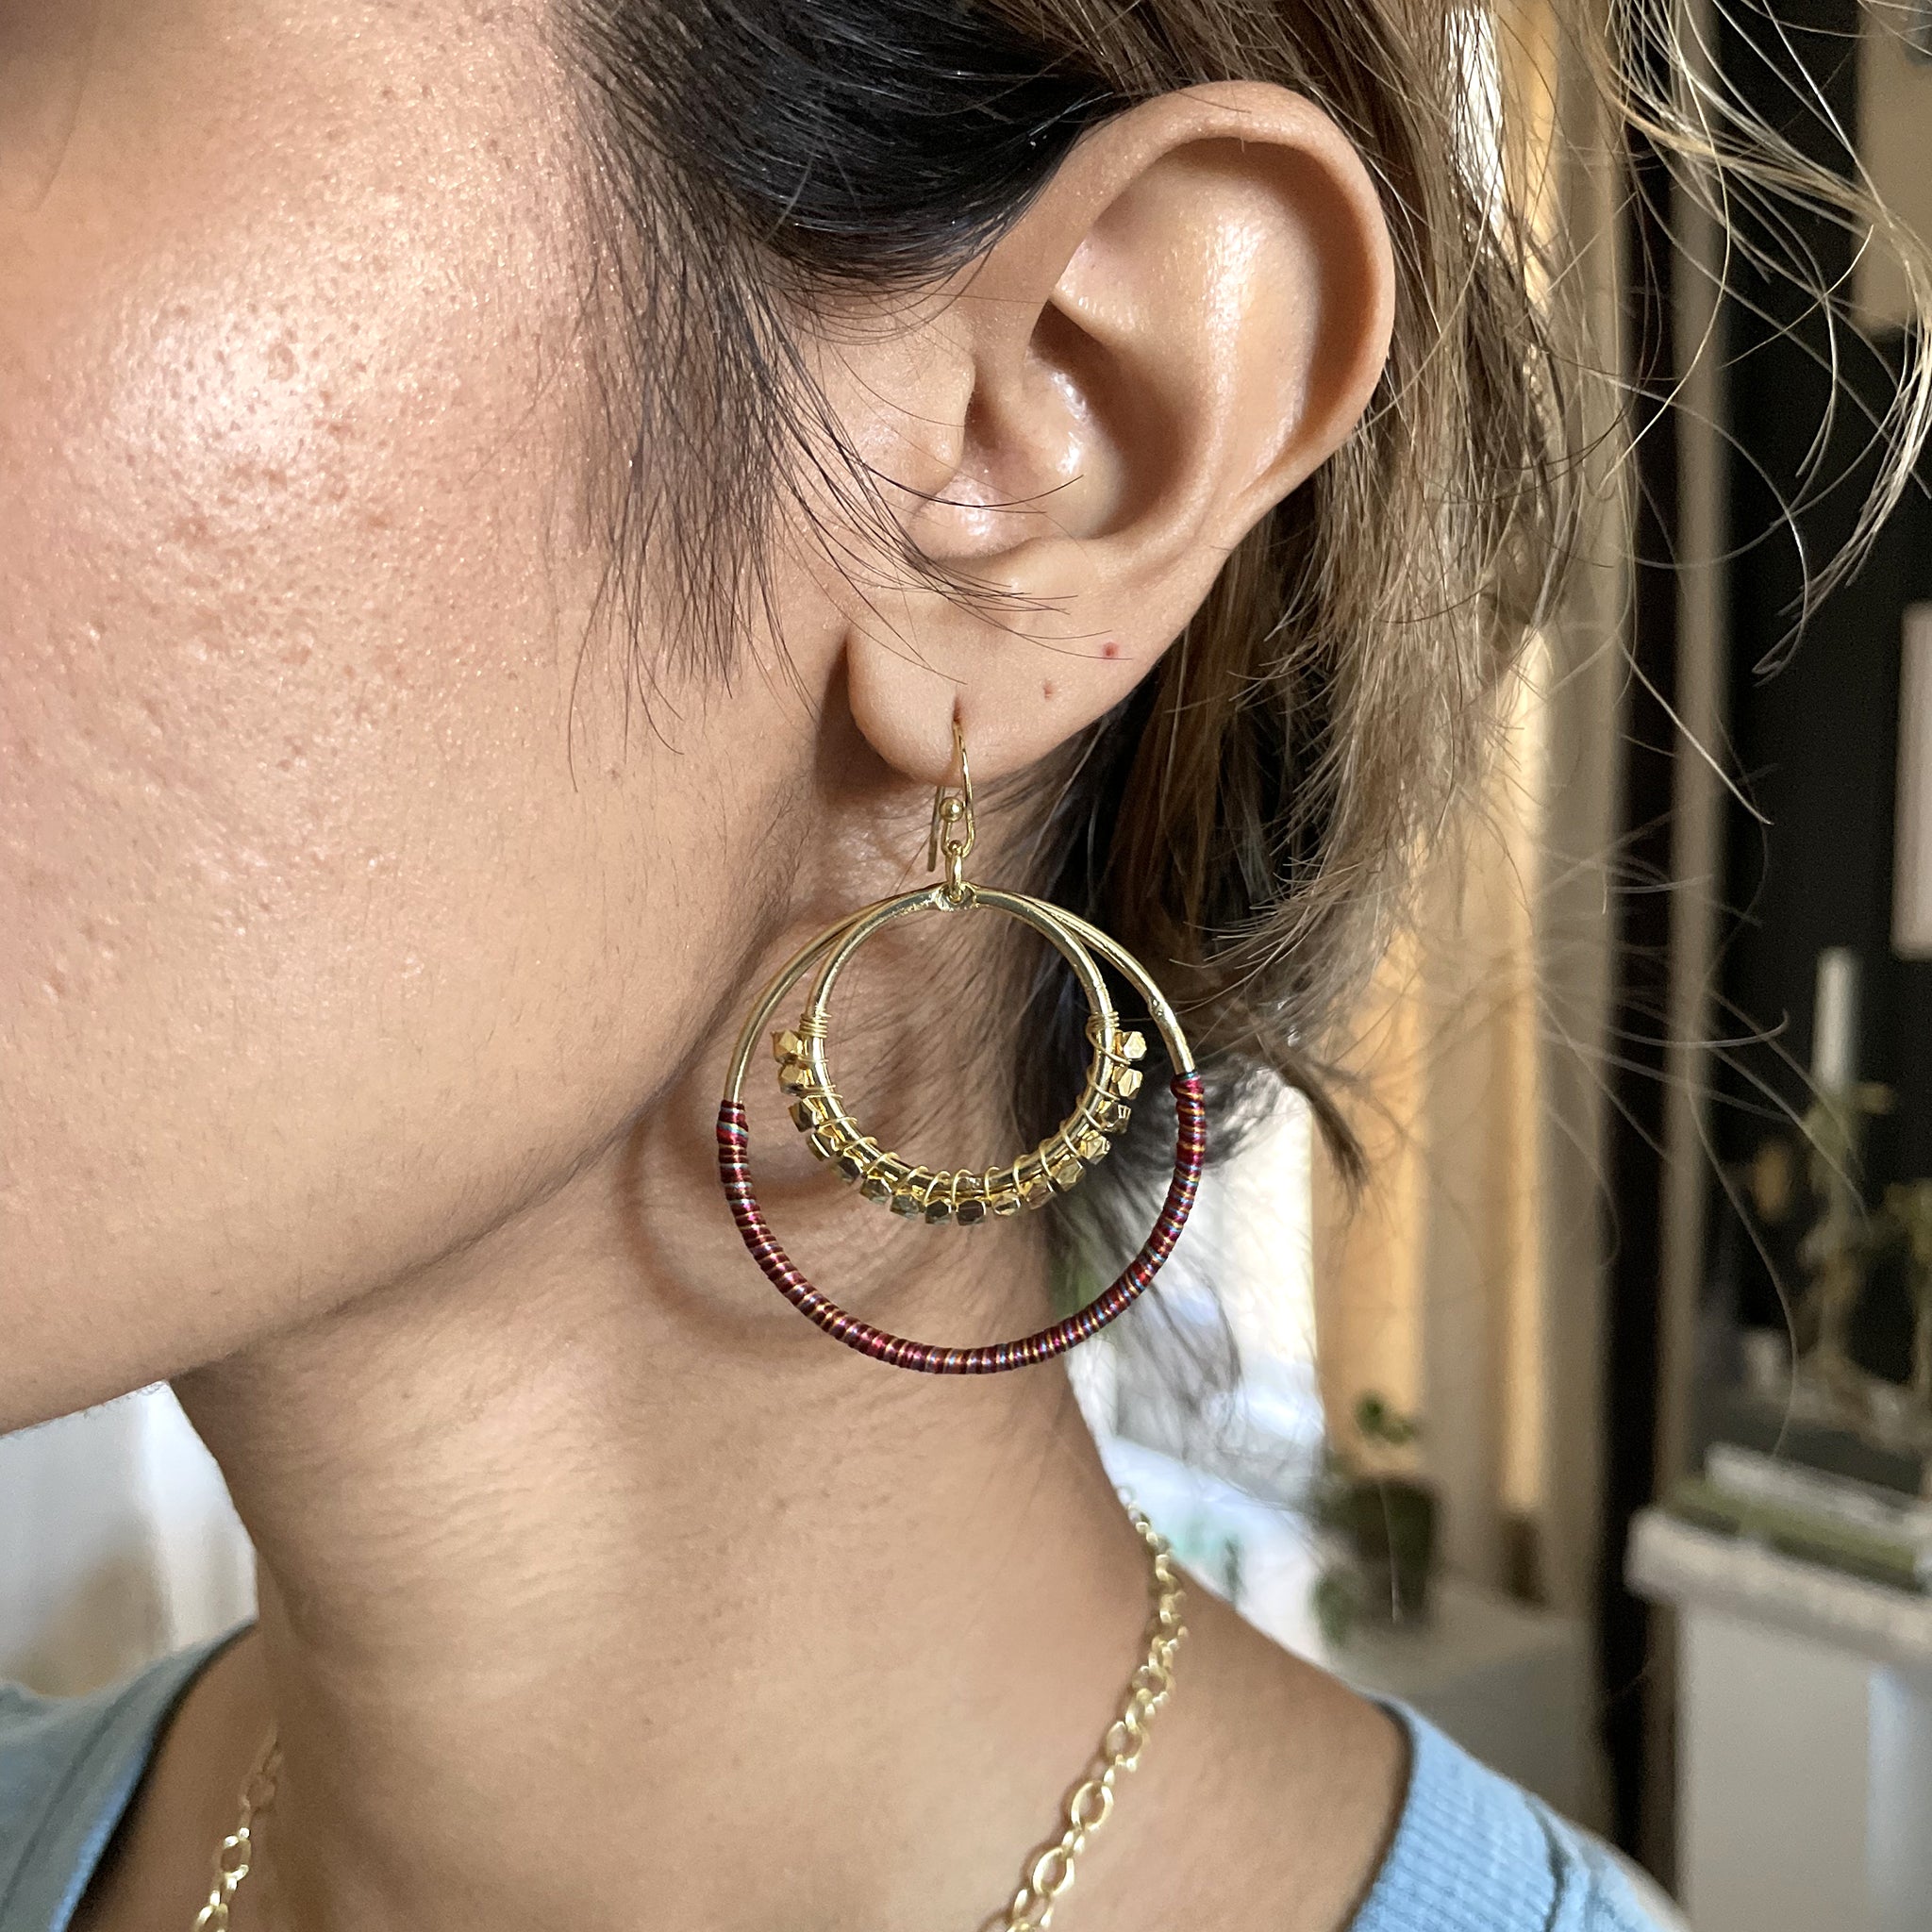 A close-up of a woman's ear while wearing the Raja Sunrise Hoops.